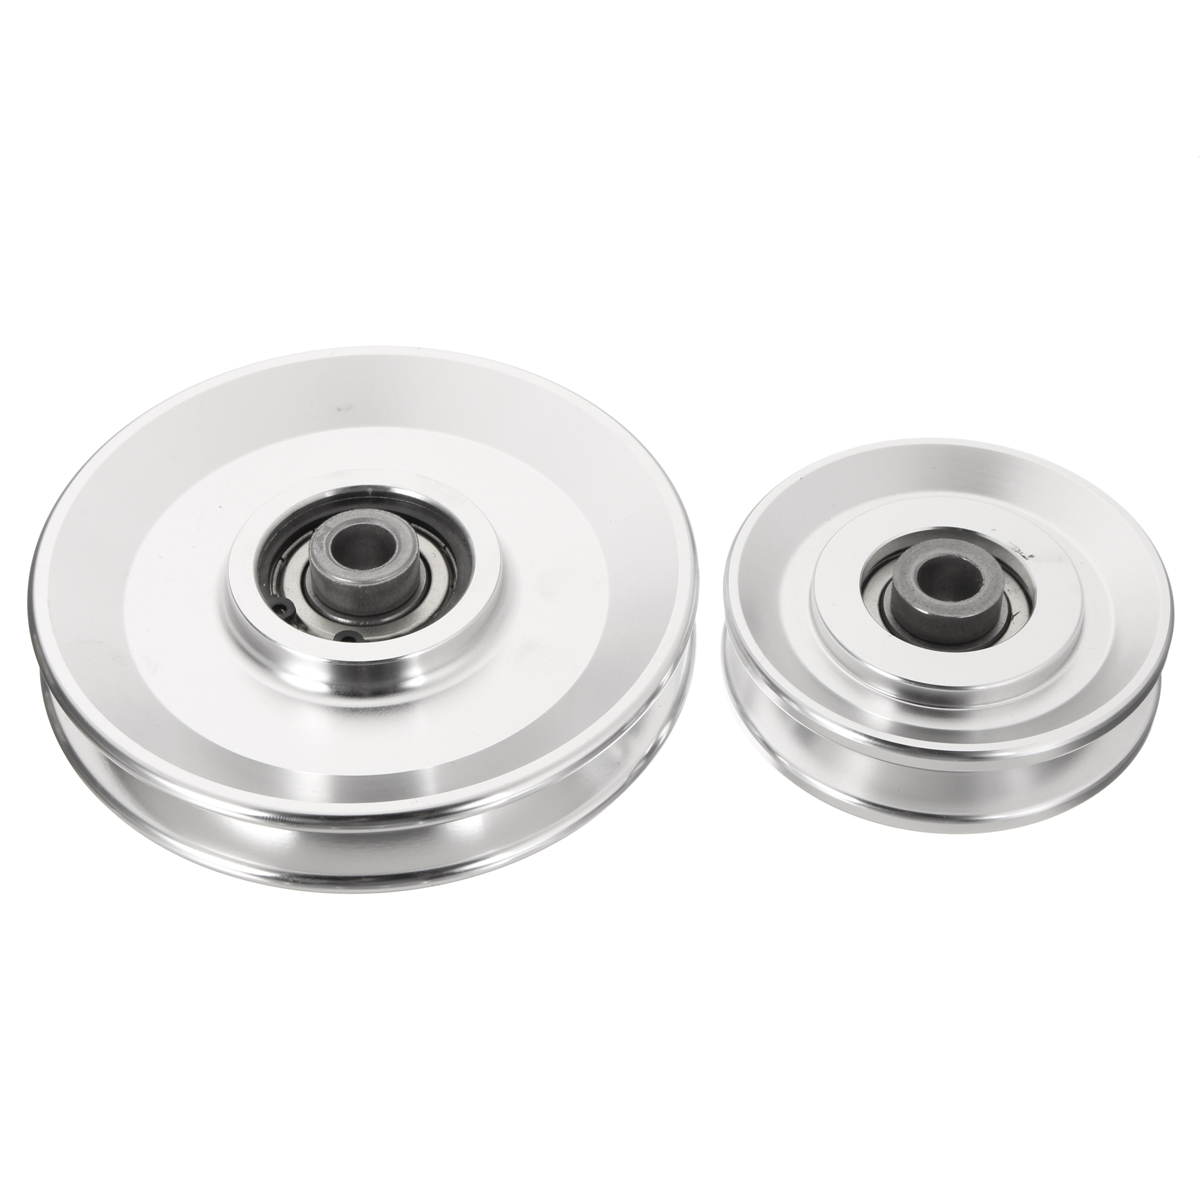 7395110114mm-Aluminum-Alloy-Bearing-Pulley-Wheels-Gym-Fitness-Equipment-Parts-Accessories-1637784-8